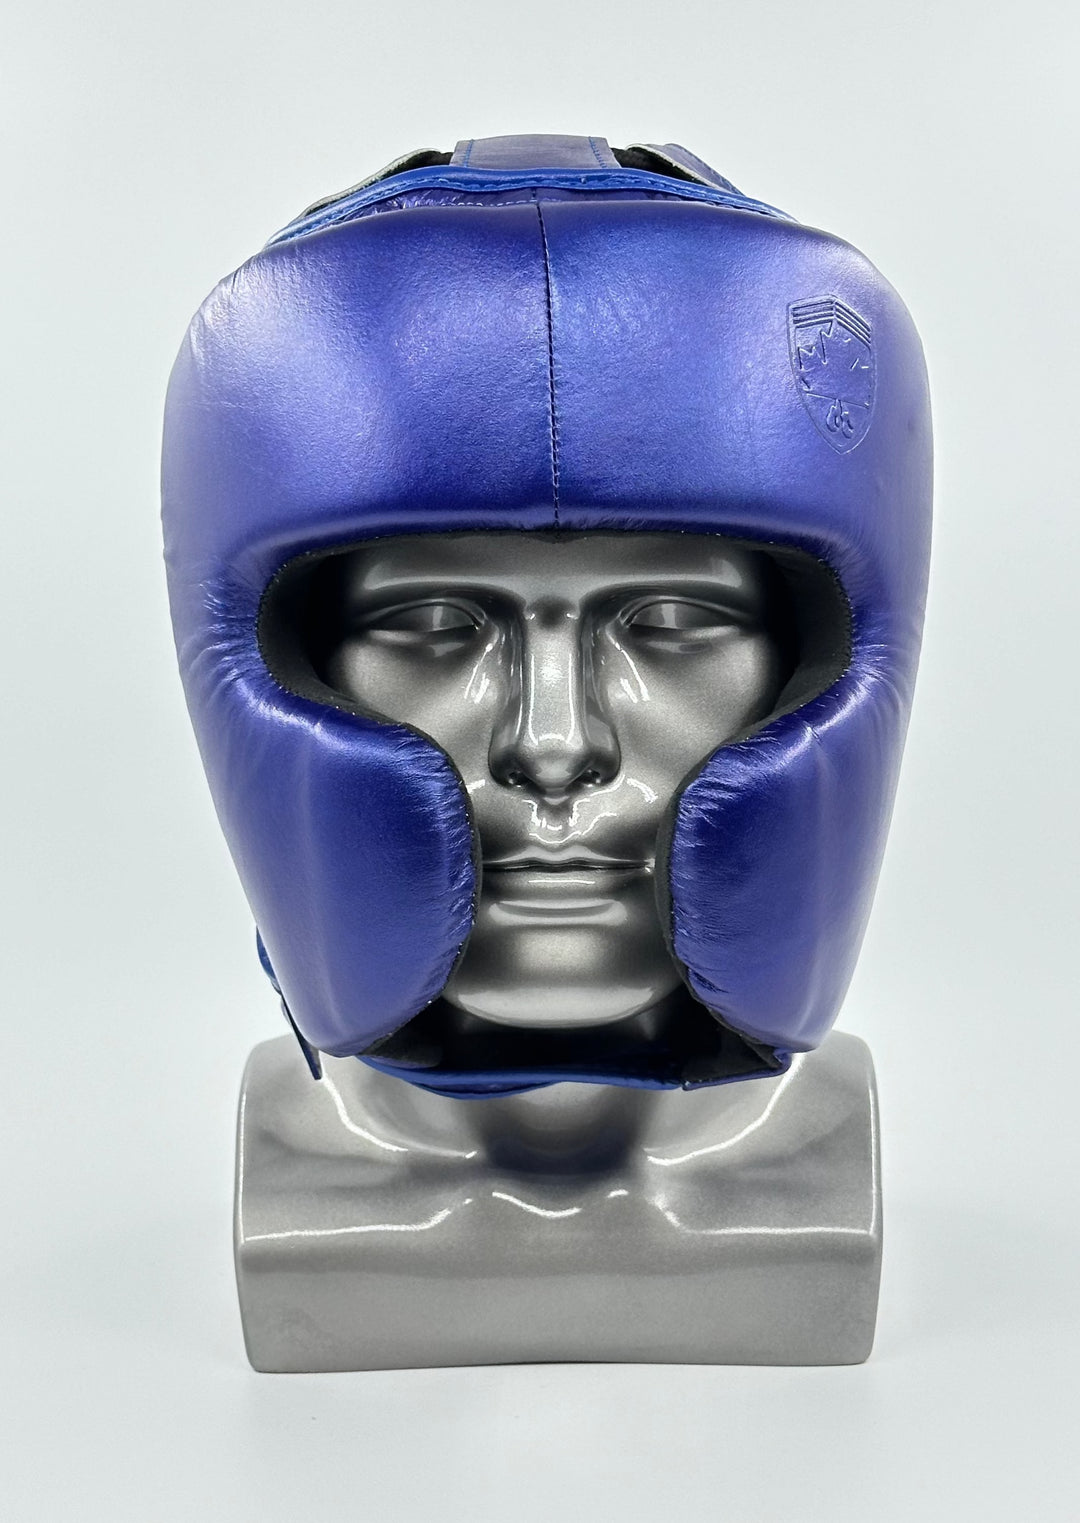 H70 SPARRING HEAD GUARD - MIDNIGHT BLUE